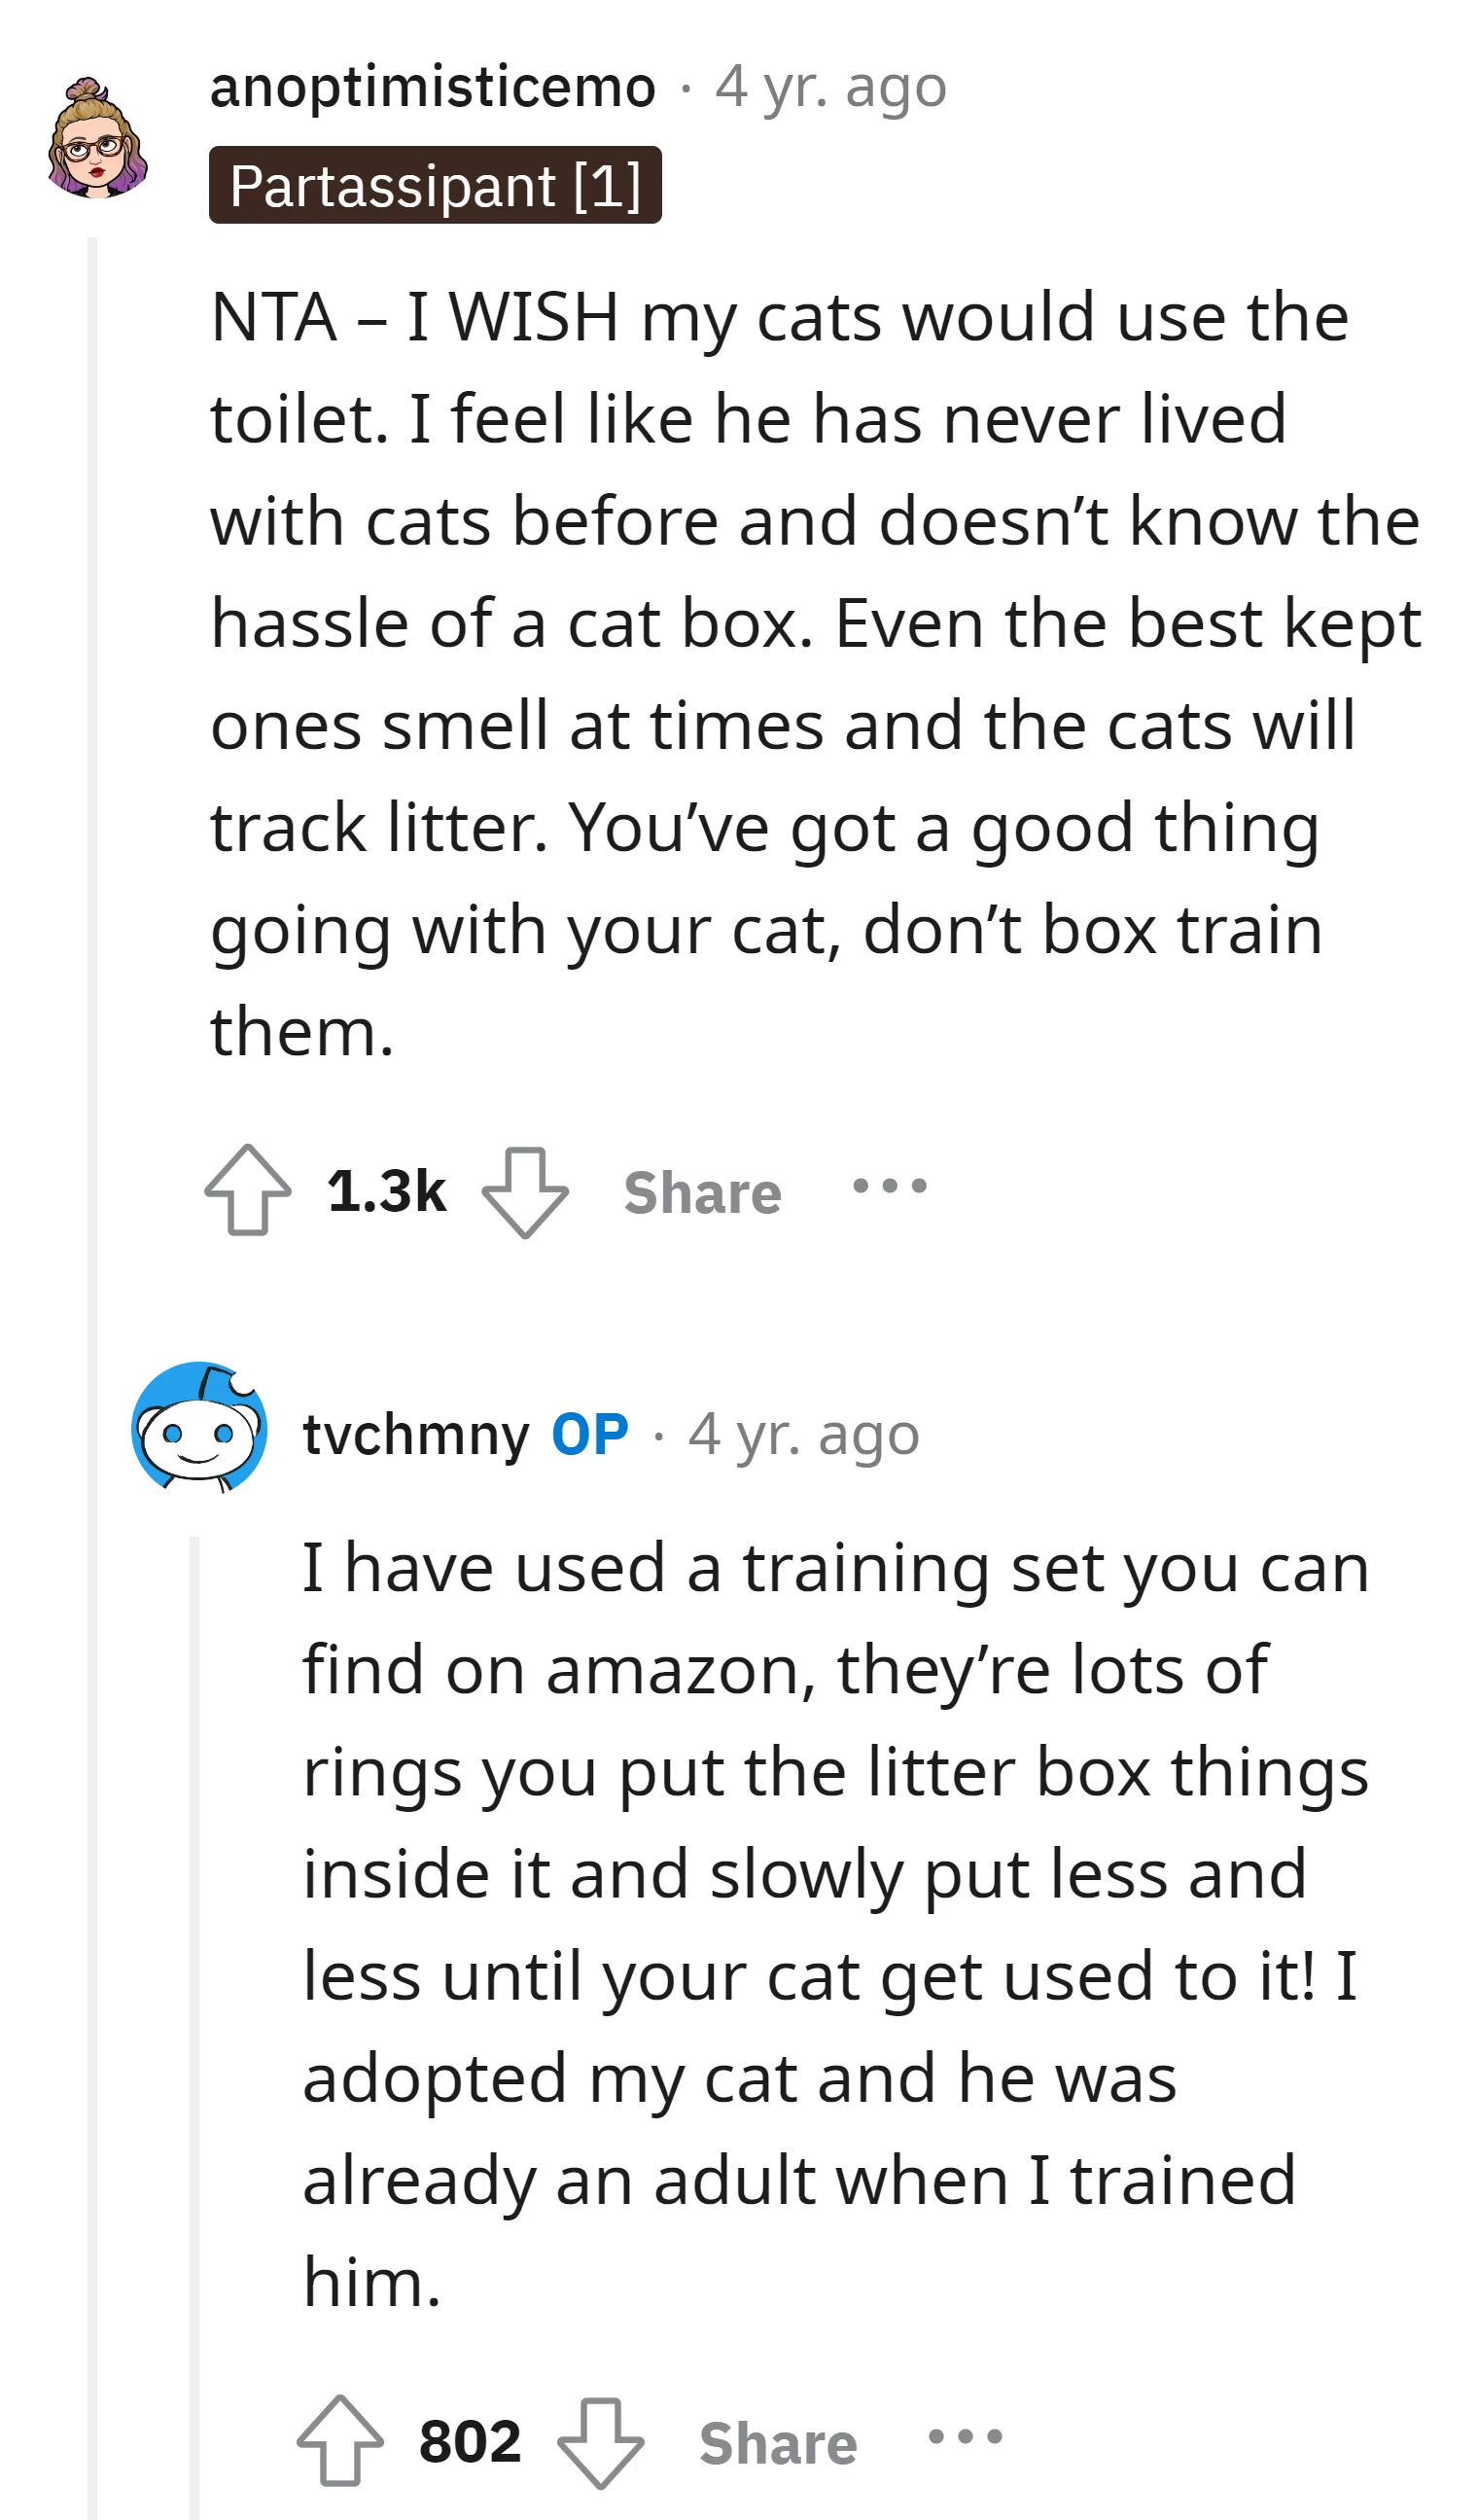 This Redditor wishes their own cats would use the toilet